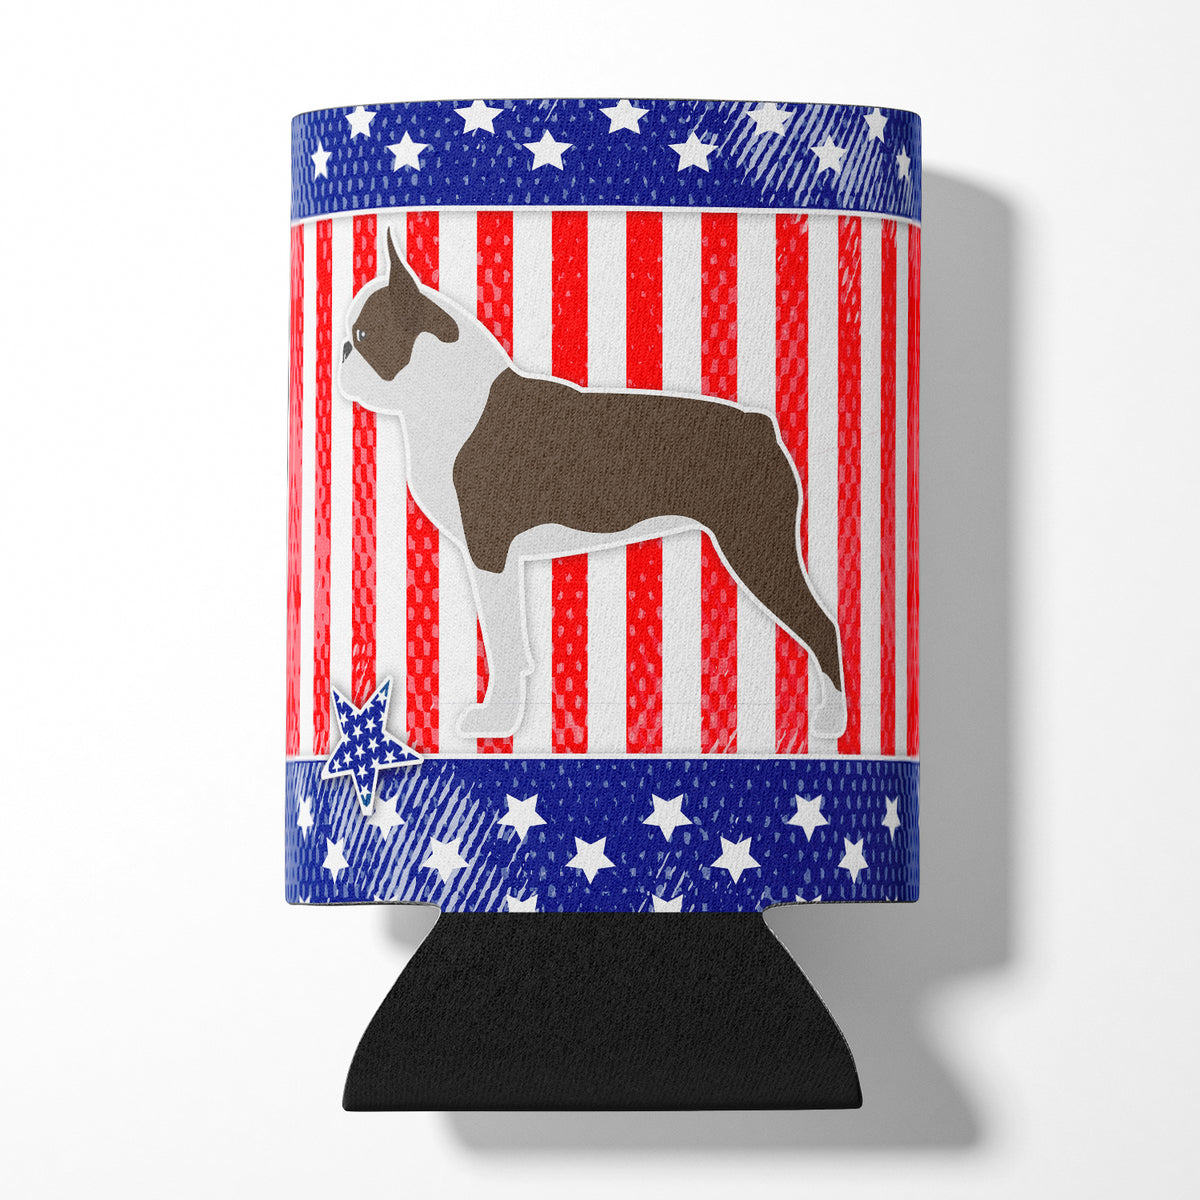 USA Patriotic Boston Terrier Can or Bottle Hugger BB3344CC  the-store.com.